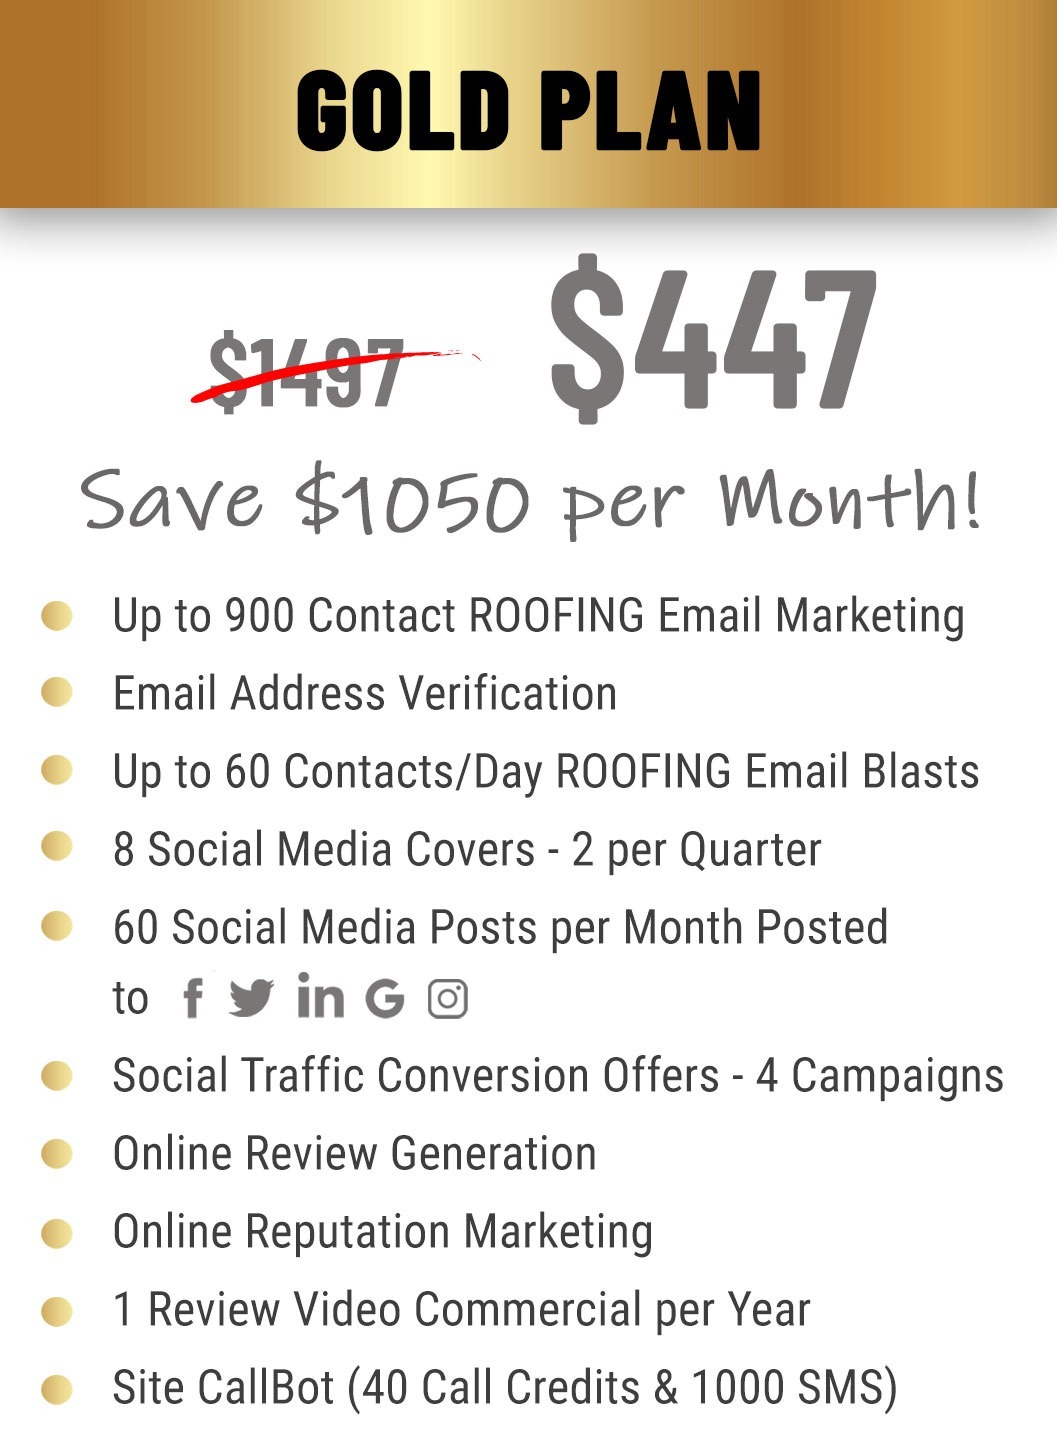 Gold Plan Pricing and Features ROOFING